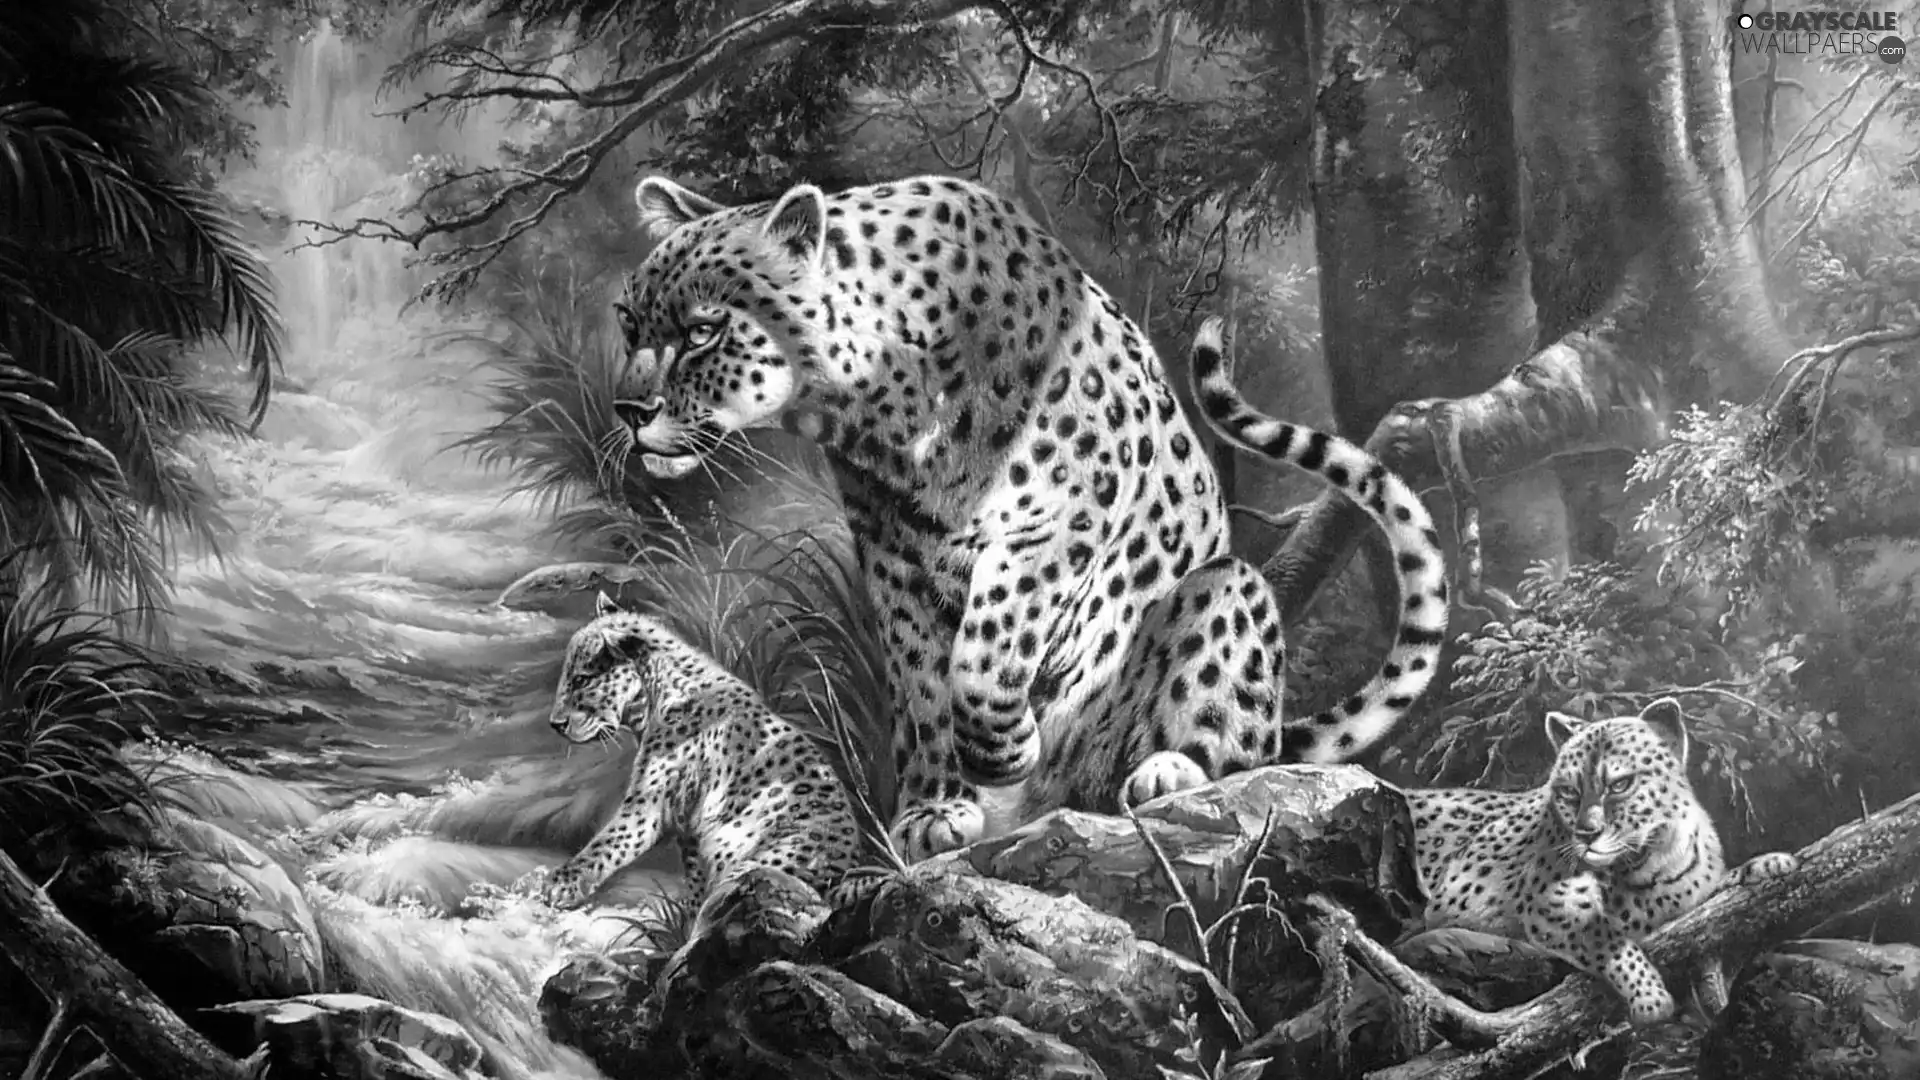 Leopard, water, forest, young